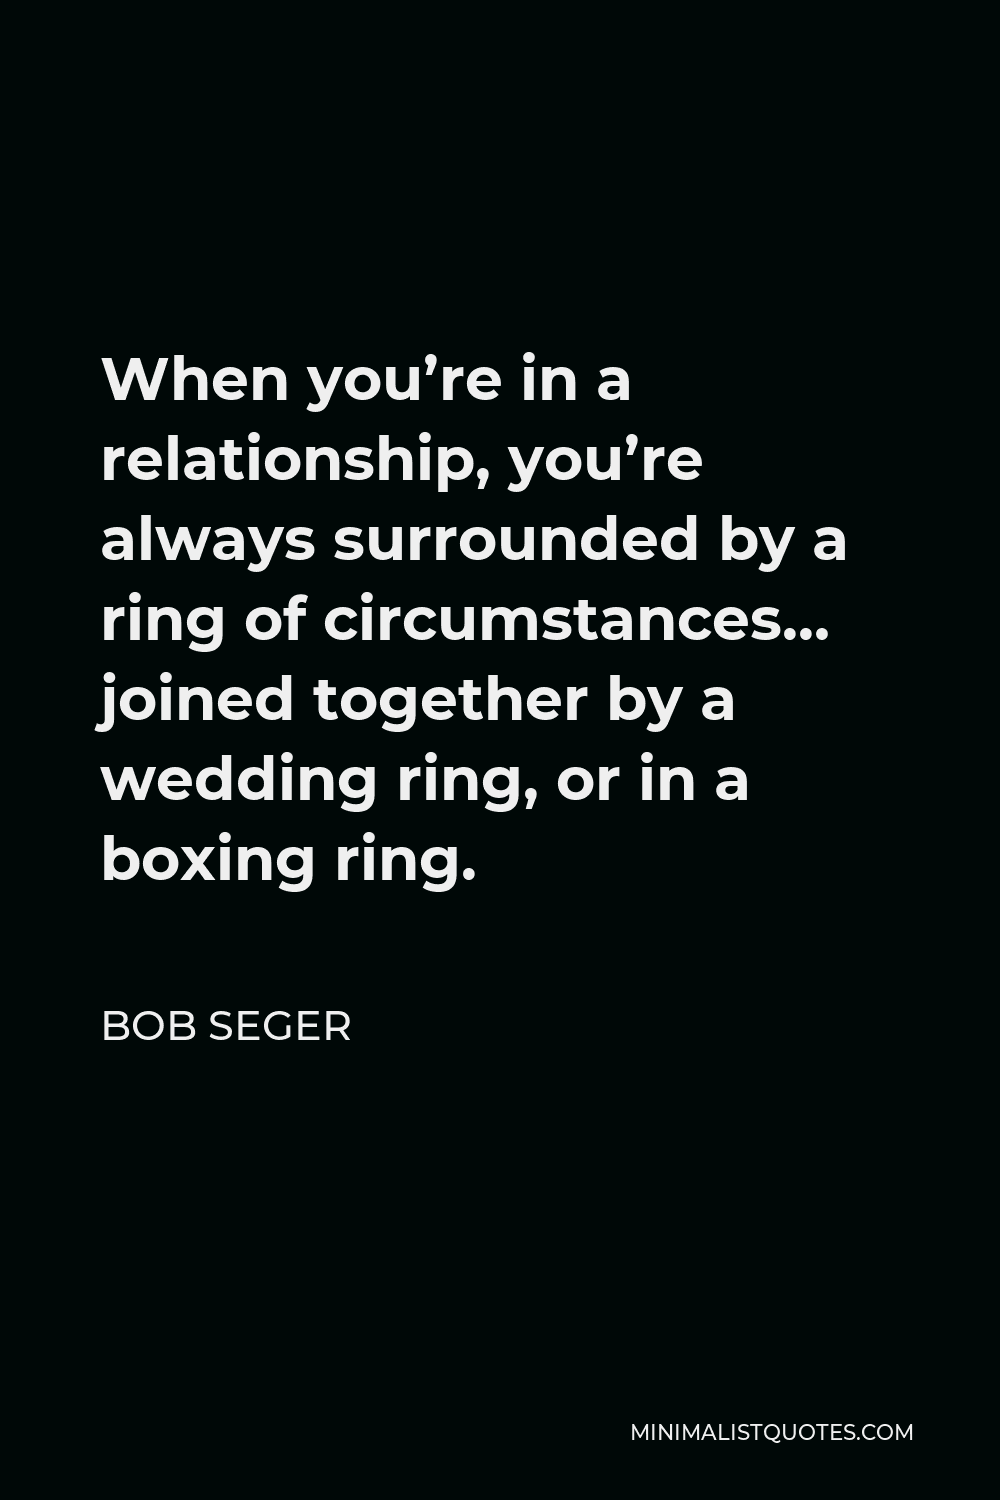 Bob Seger Quote - When you’re in a relationship, you’re always surrounded by a ring of circumstances… joined together by a wedding ring, or in a boxing ring.